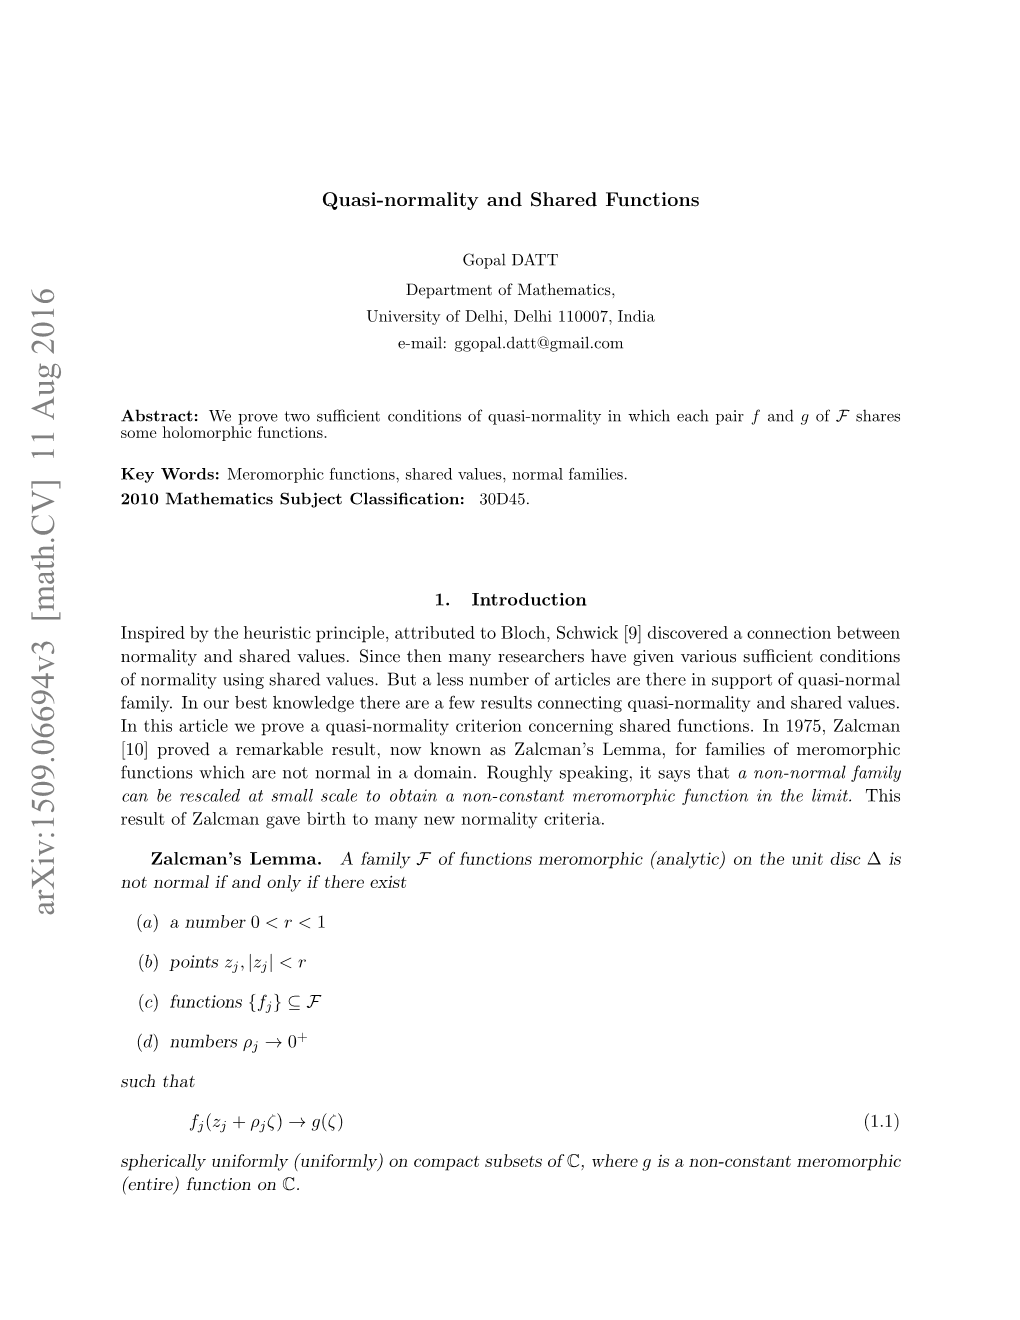 Quasi-Normality and Shared Functions